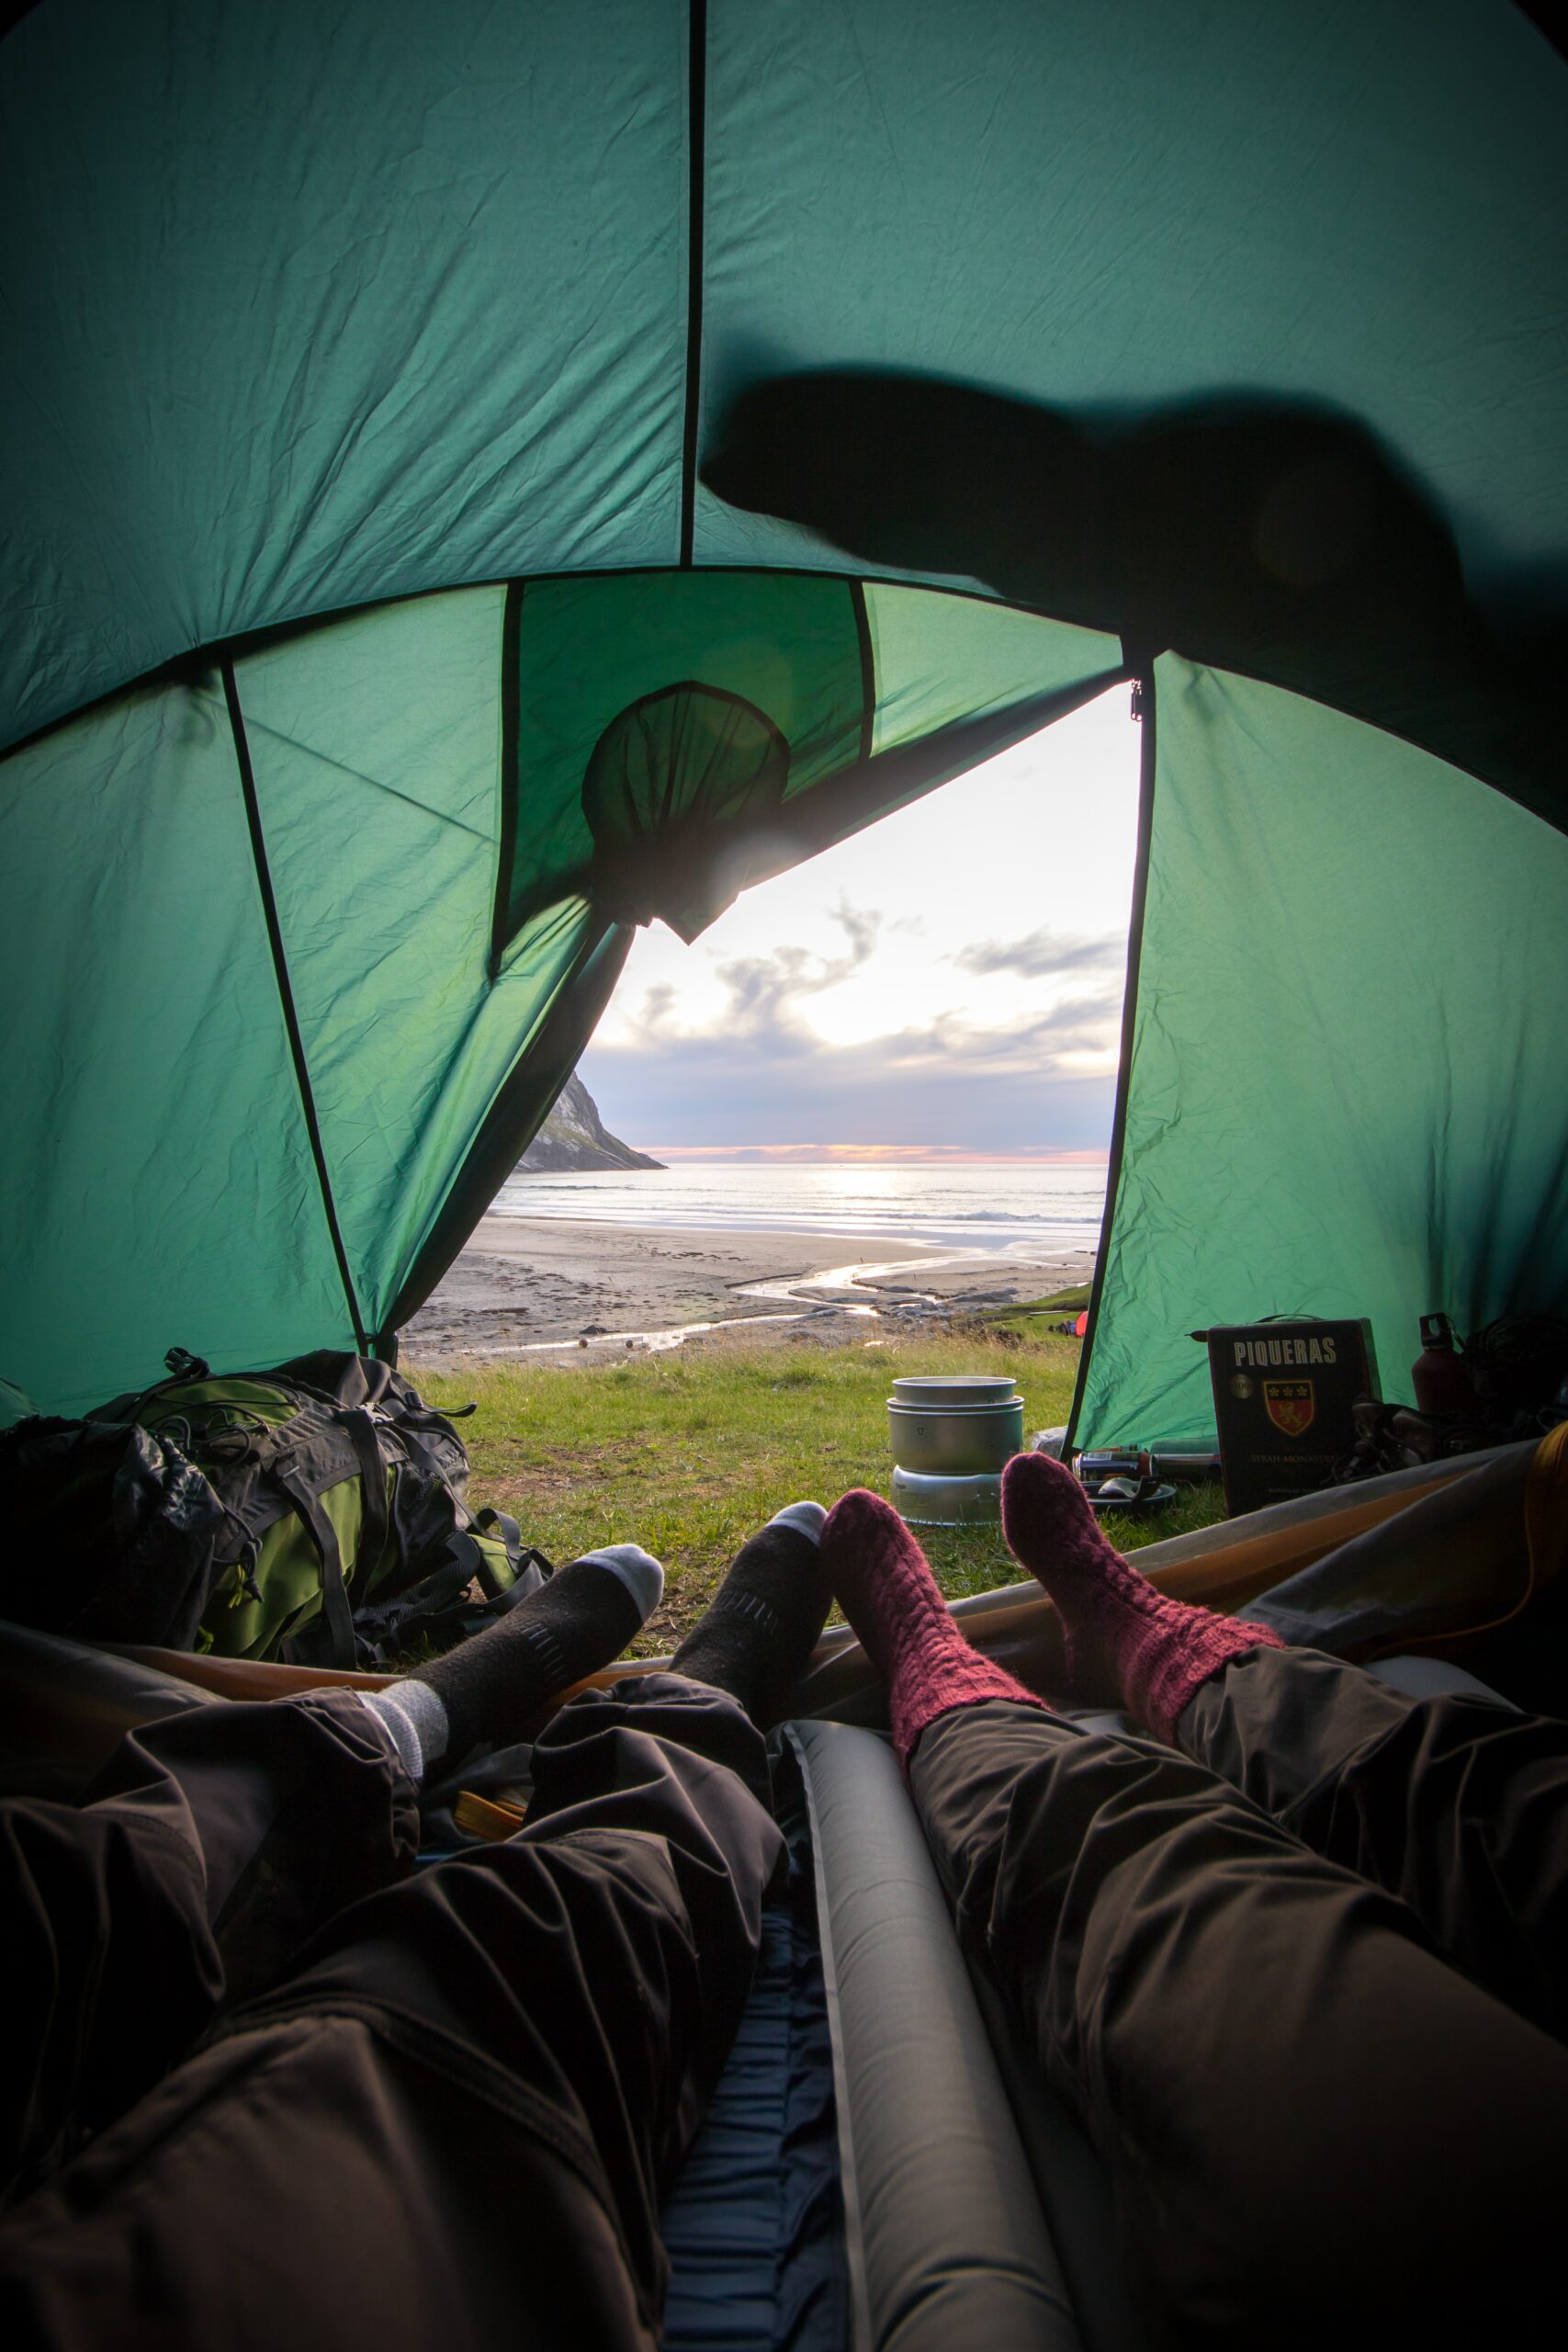 Camping site is one of the top niches for online business.